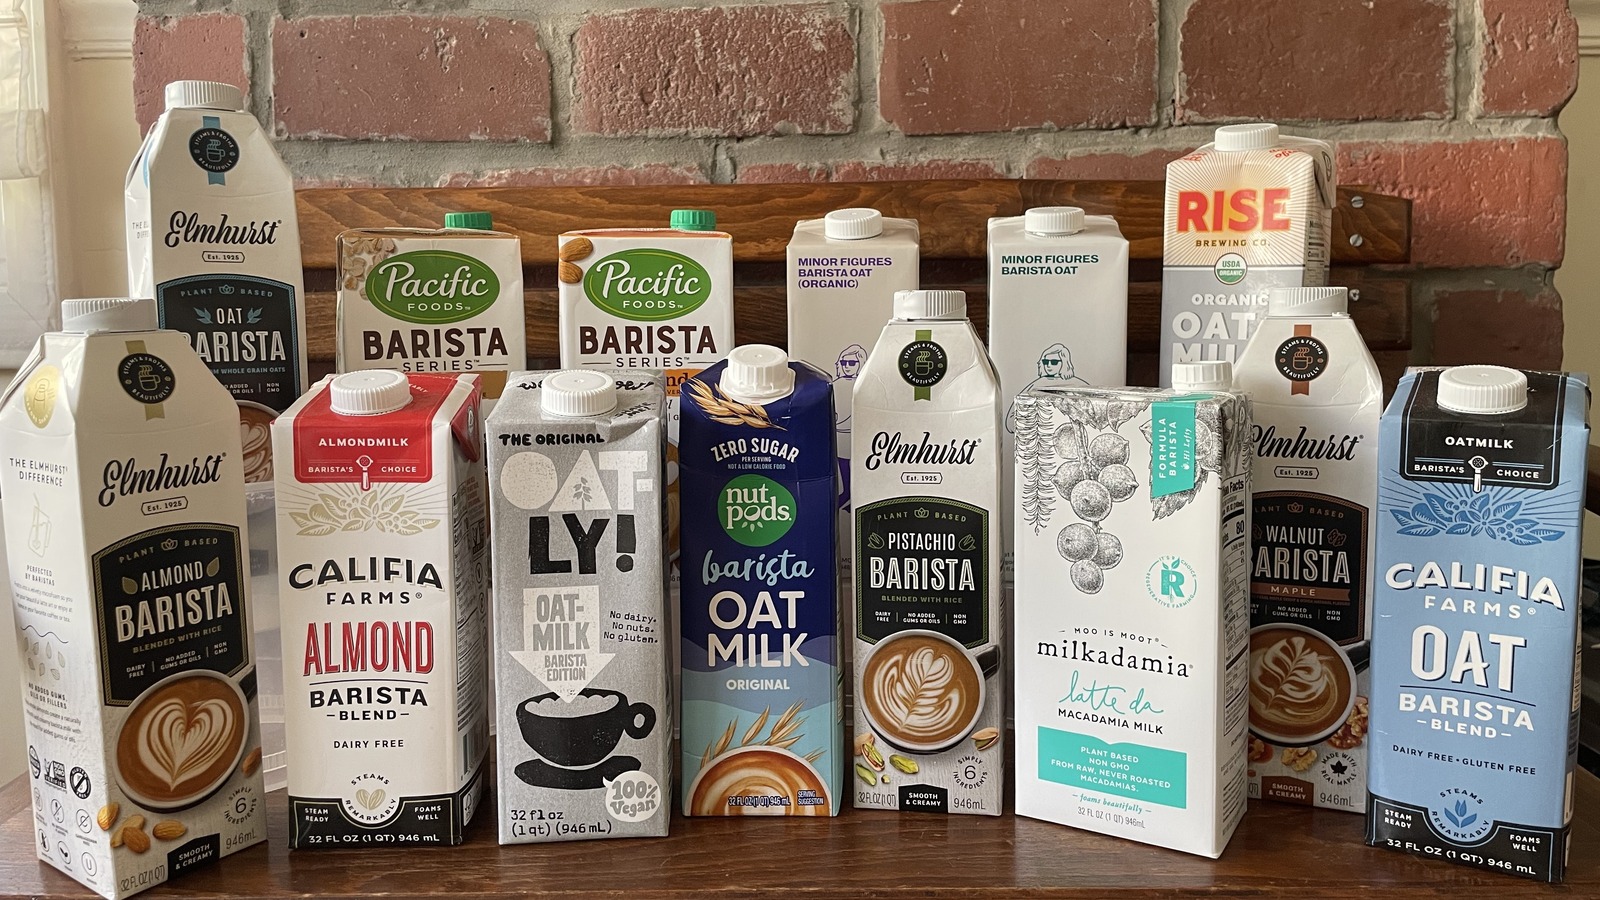 https://www.tastingtable.com/img/gallery/we-tested-and-ranked-13-barista-milks-in-our-lattes/l-intro-1700585892.jpg